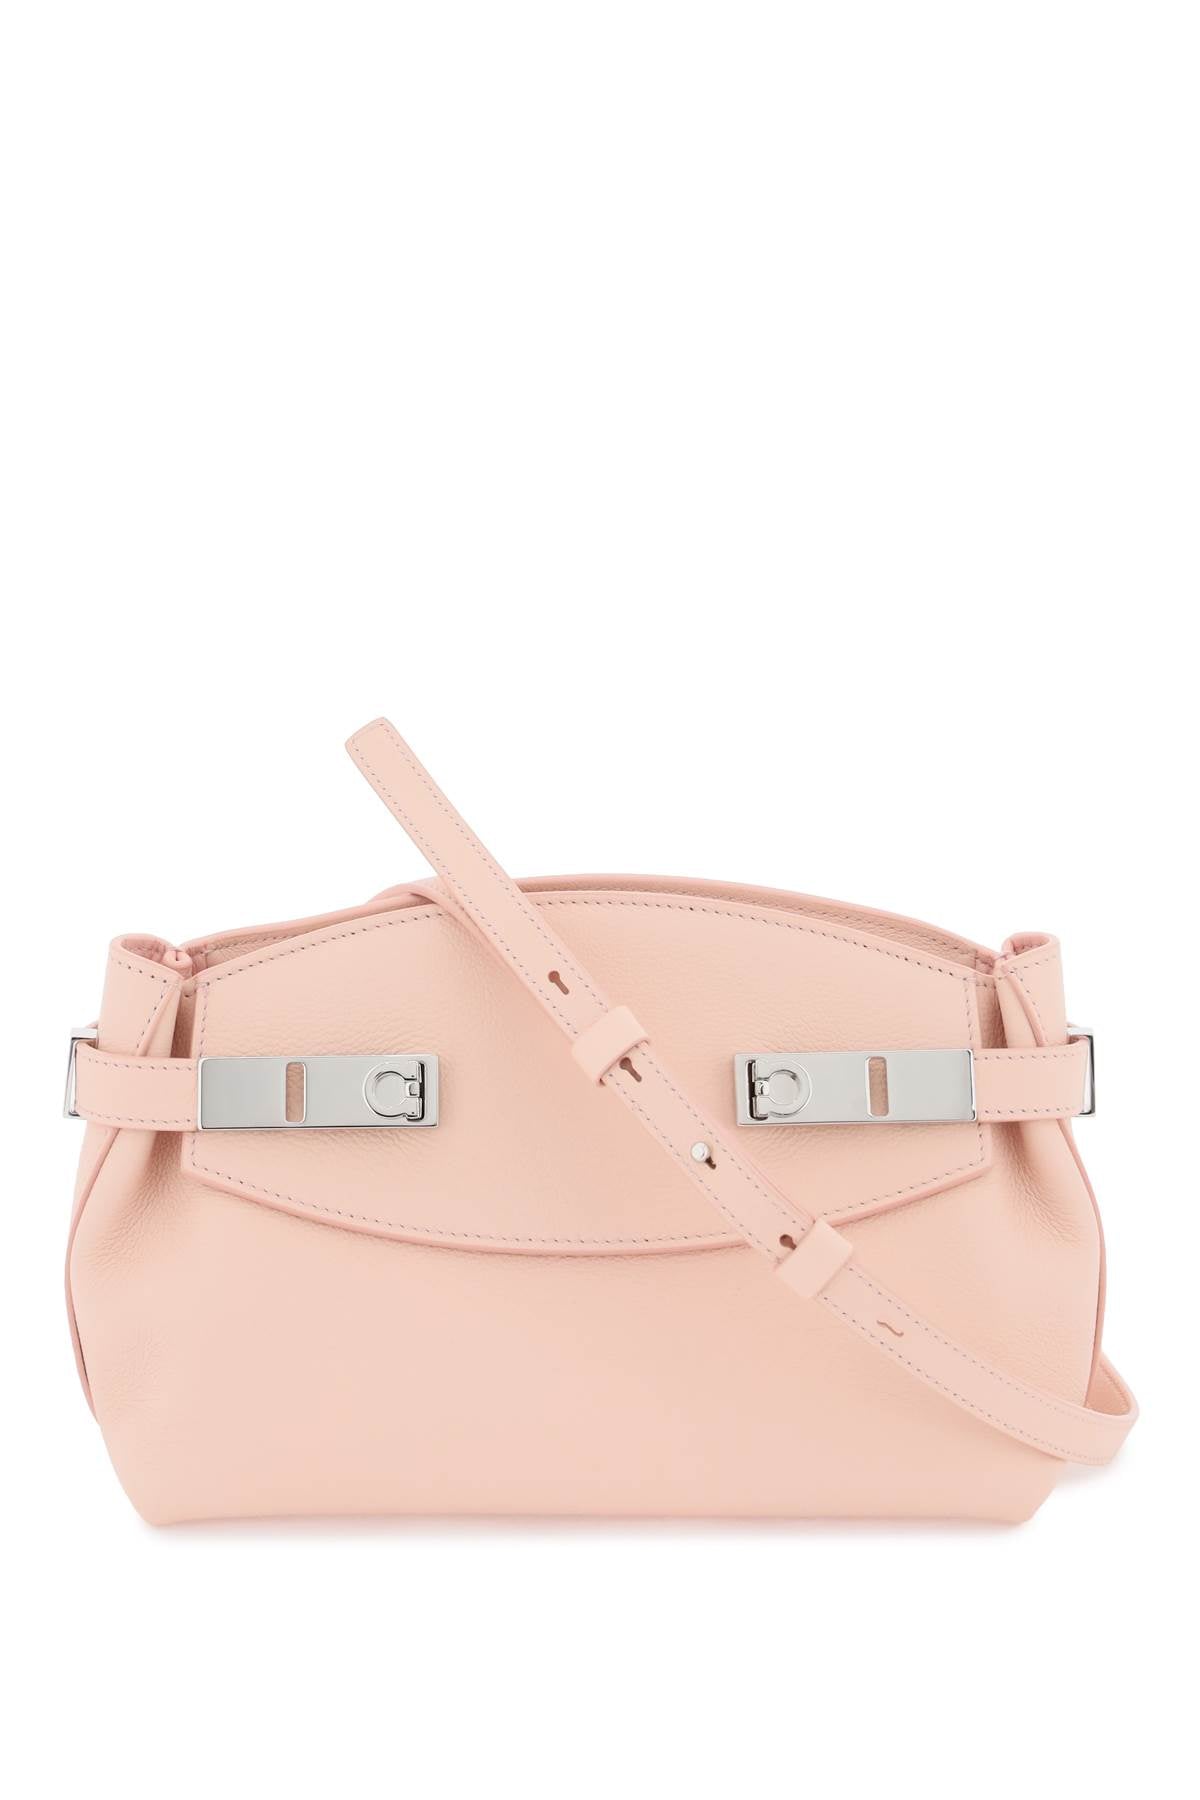 FERRAGAMO Small Hug Pink Leather Pouch Handbag with Gancini Silver-Tone Buckle and Removable Strap